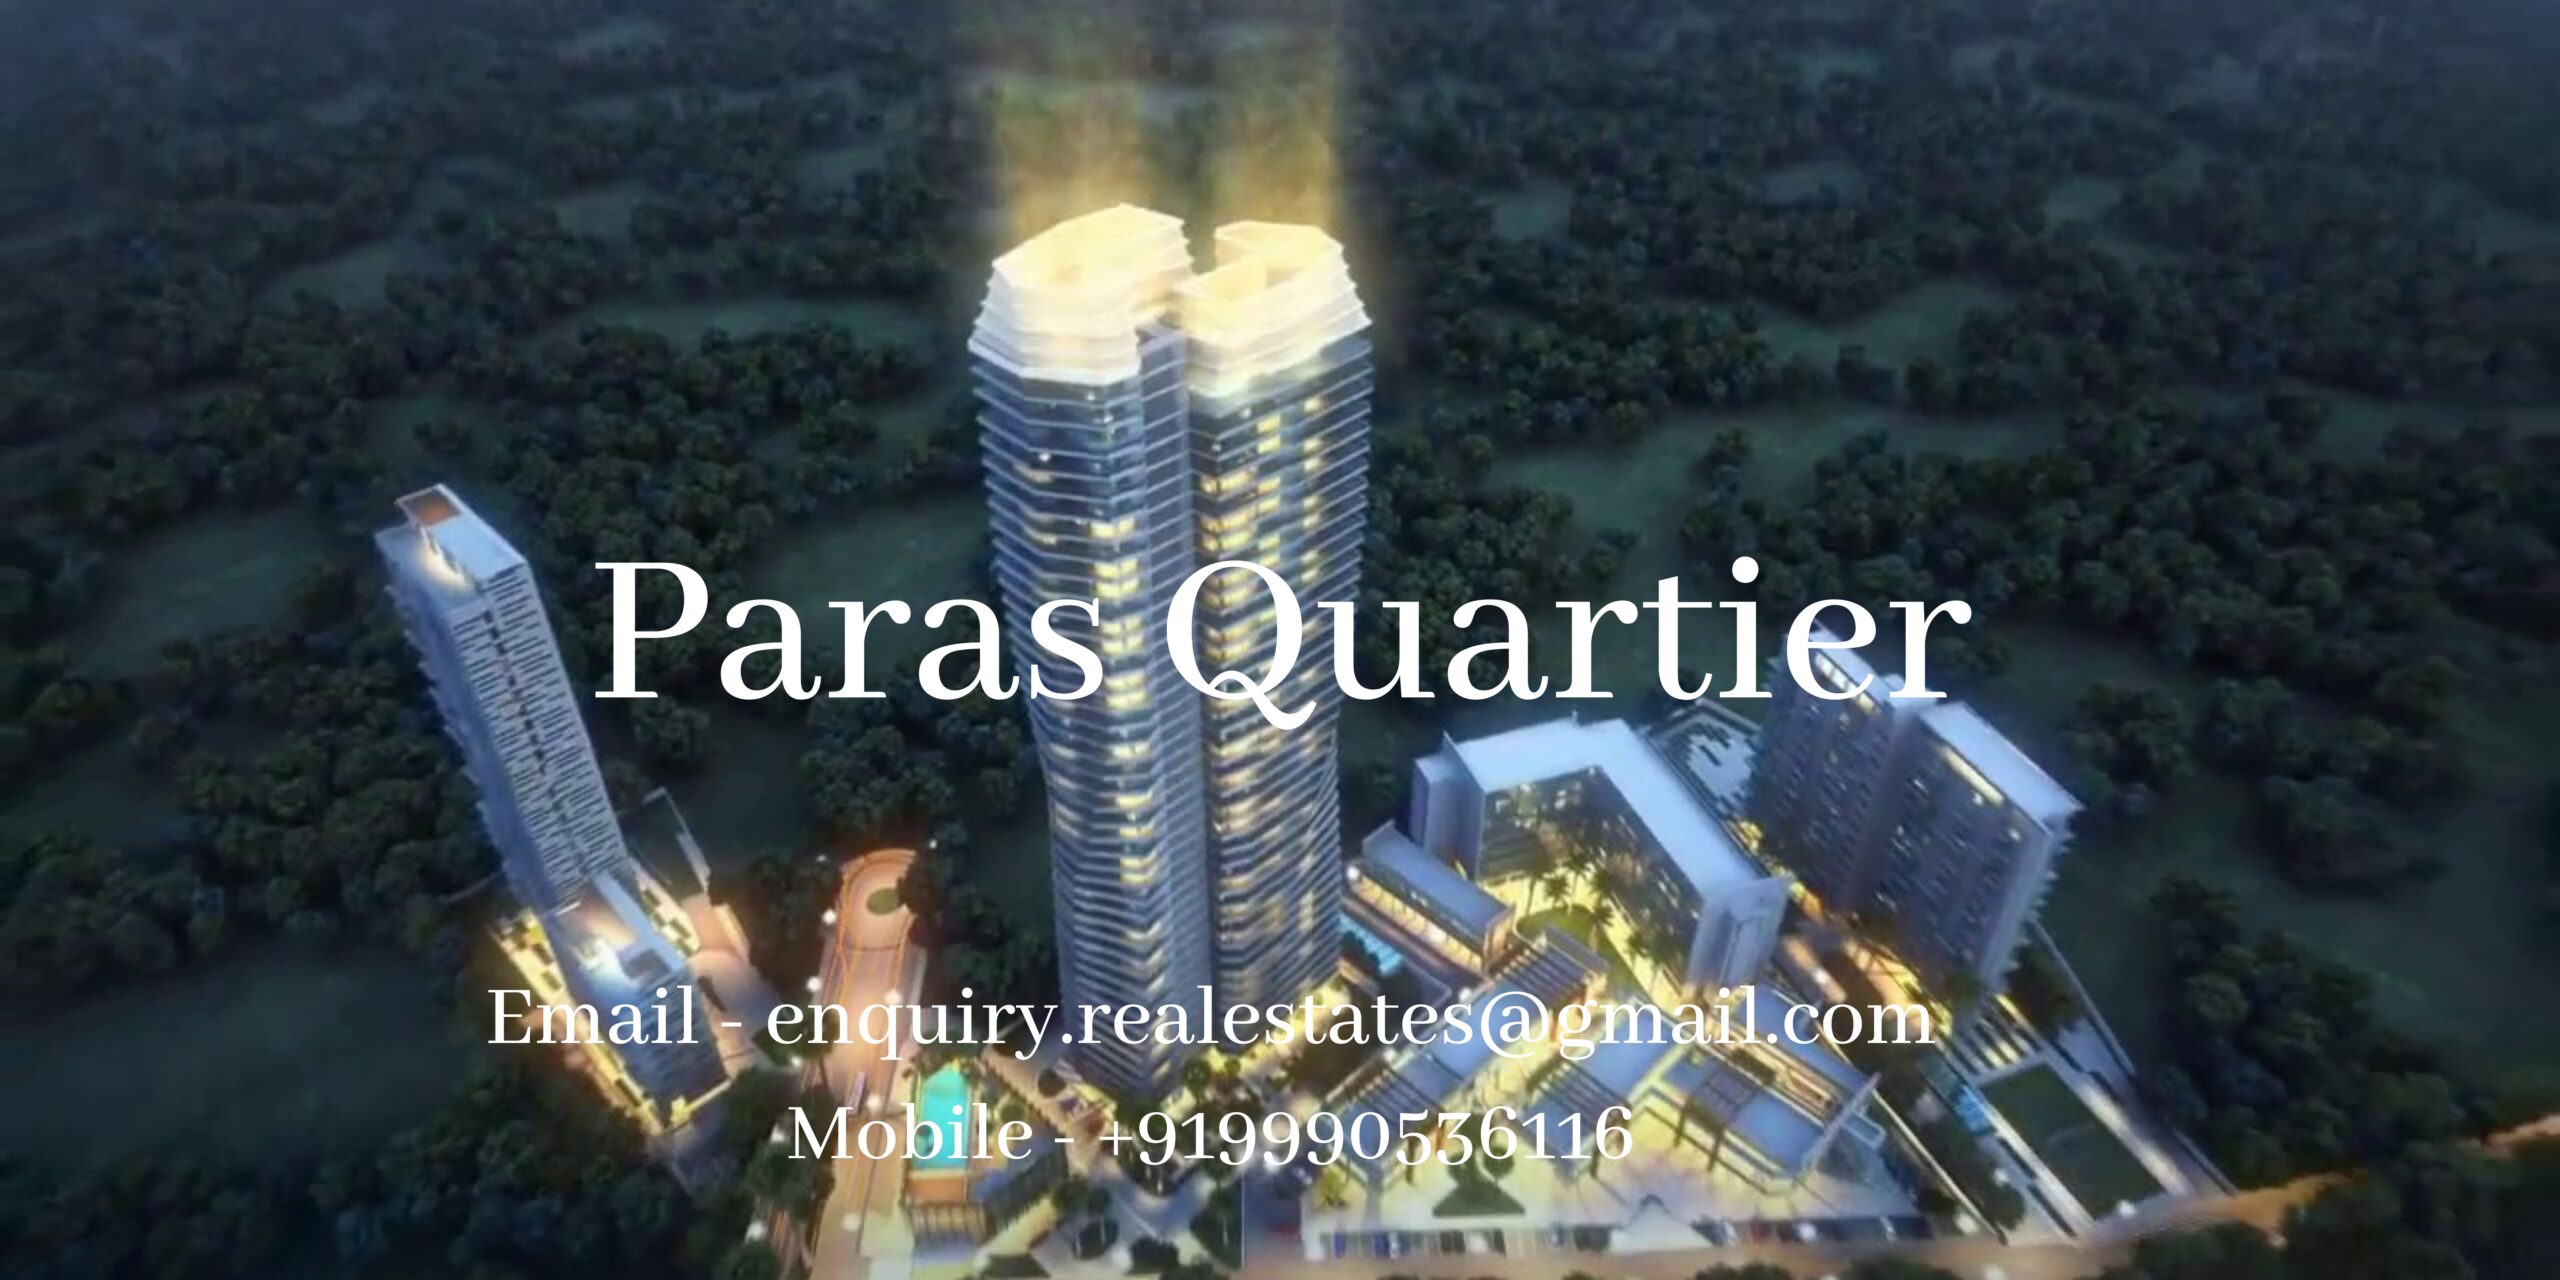 Paras Quartier Gurgaon The Ultimate in High-End Living